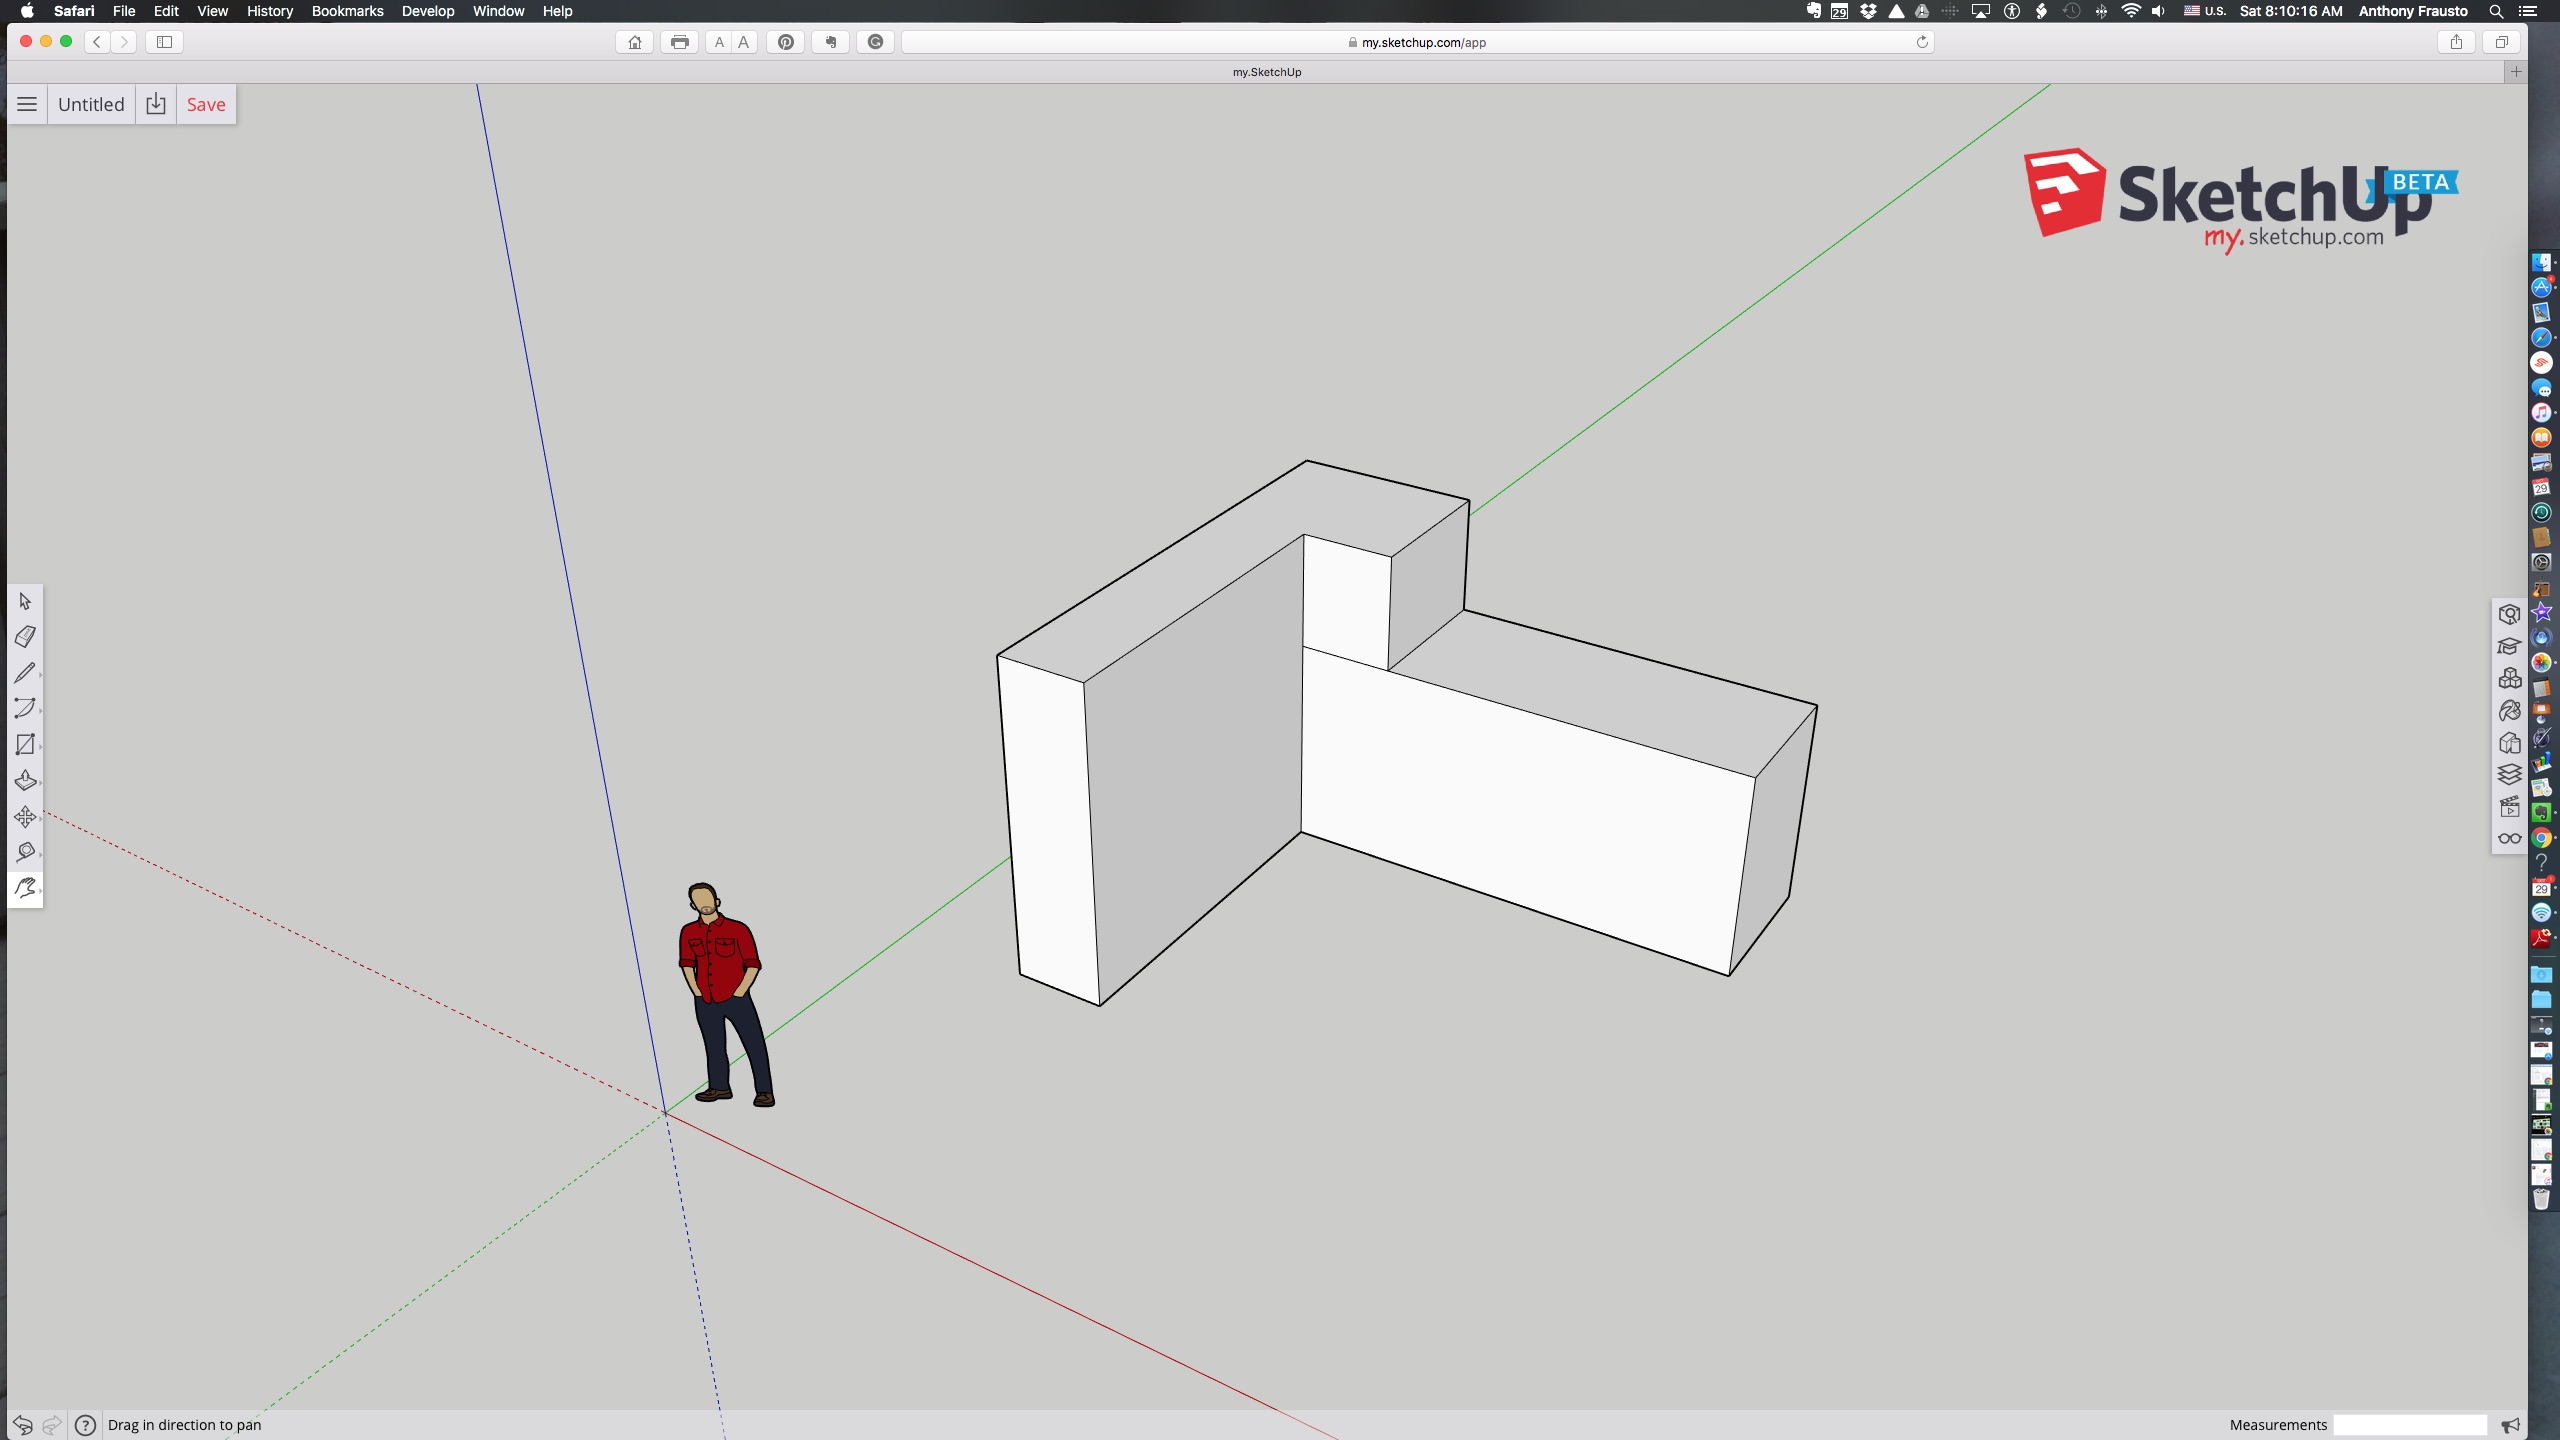 sketchup on the web